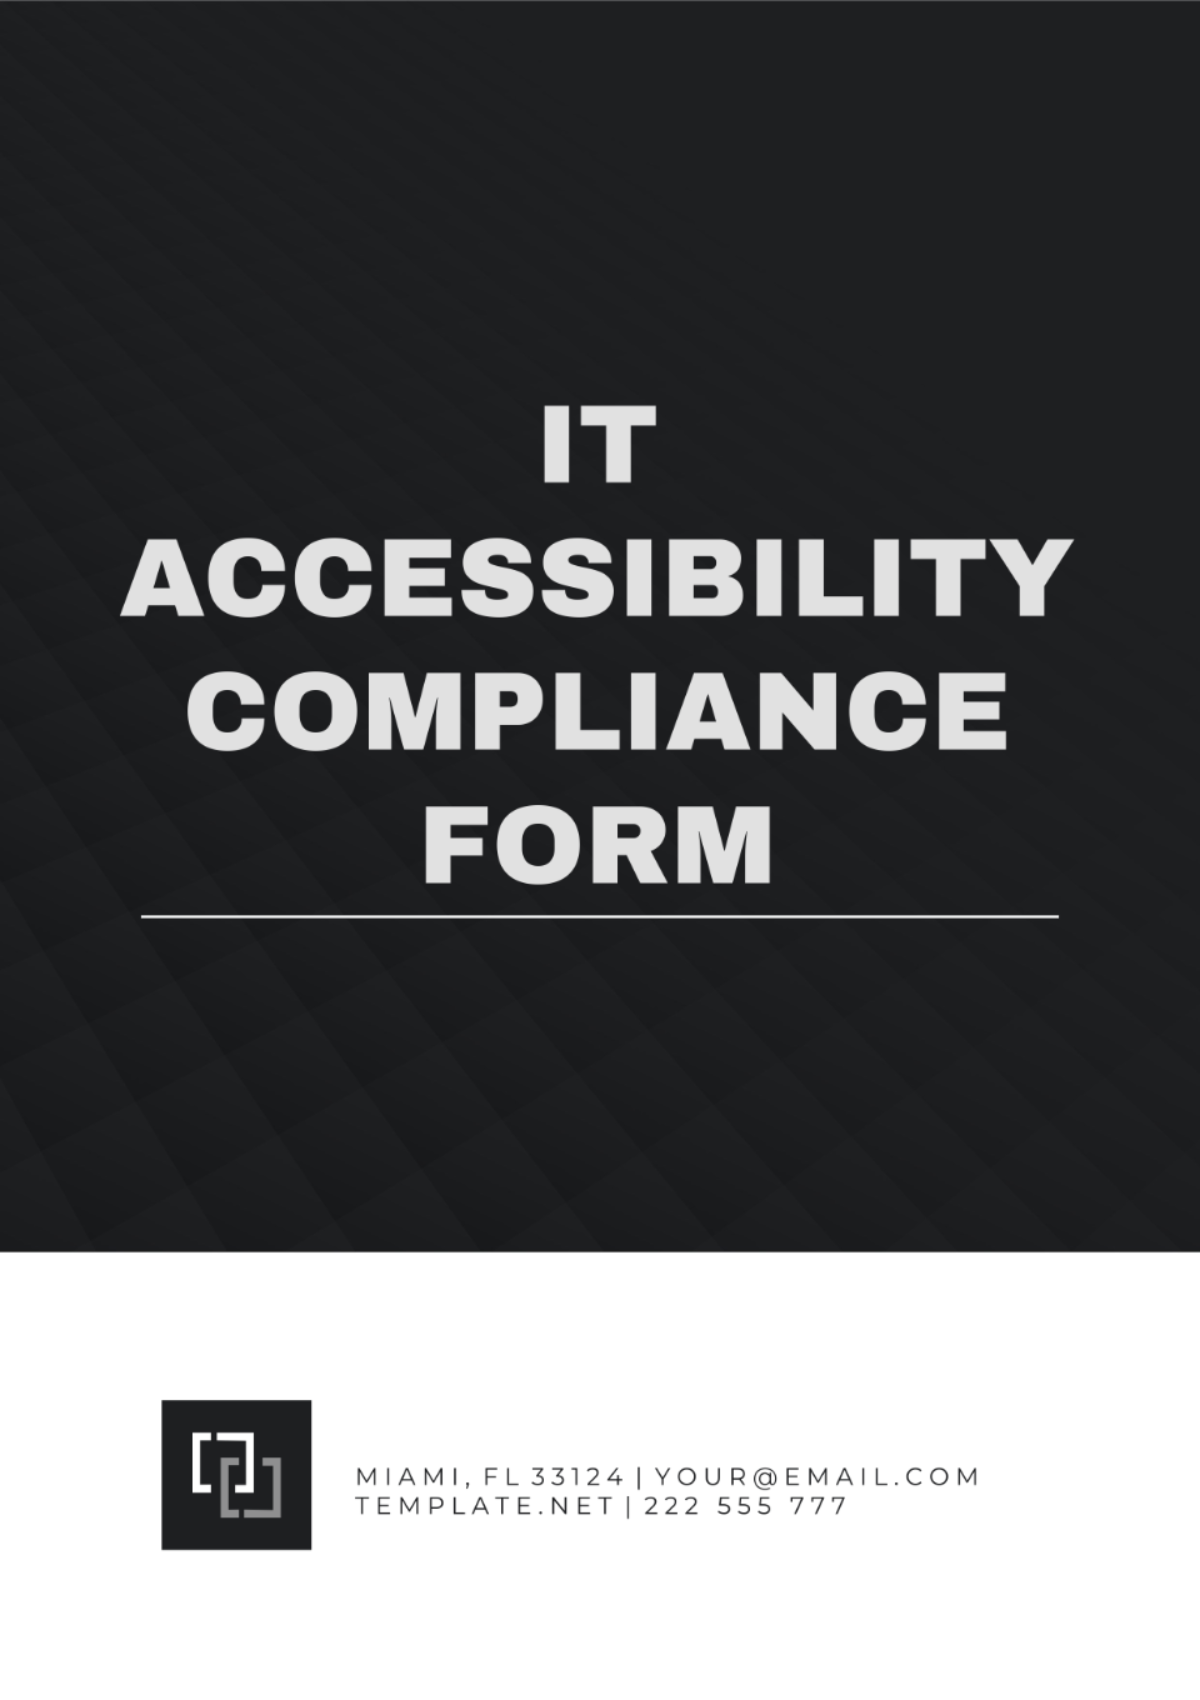 Free IT Accessibility Compliance Form Template